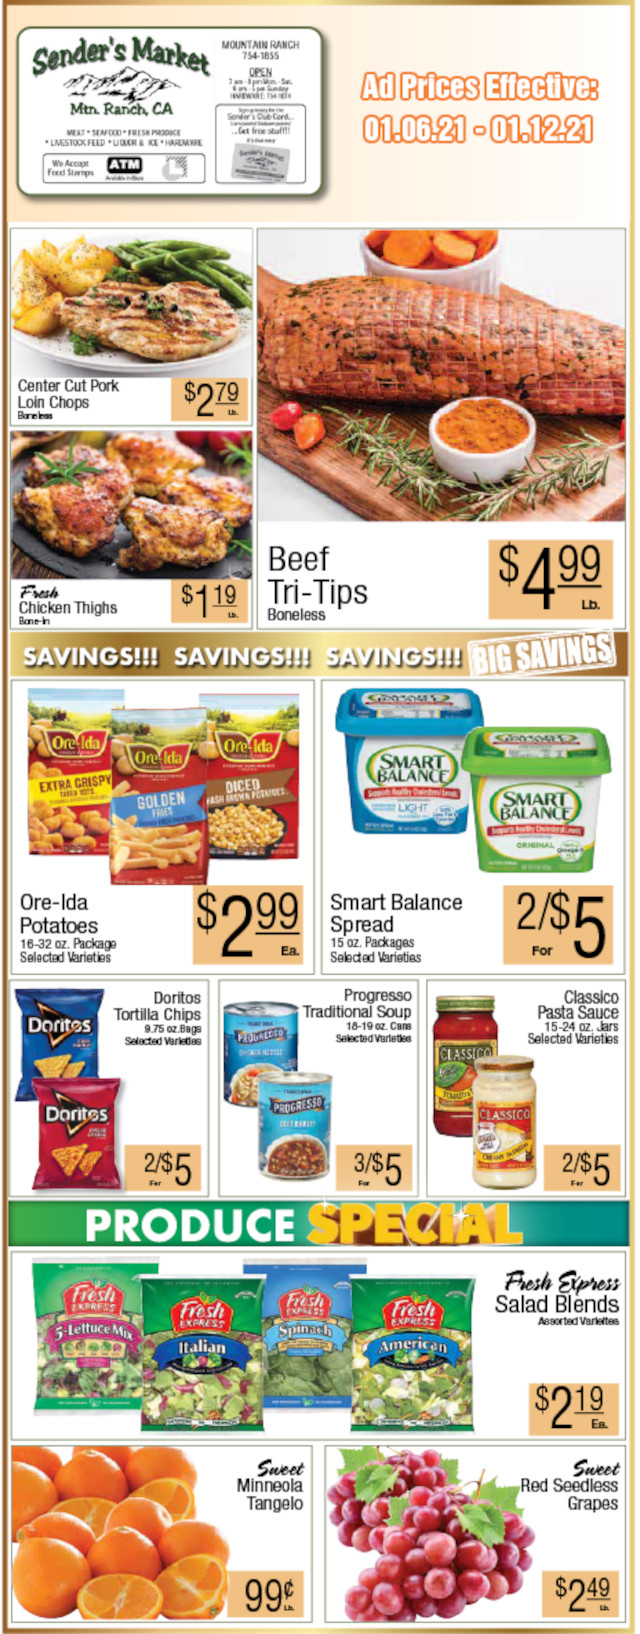 Sender’s Market’s Weekly Ad & Grocery Specials Through January 12th!  Shop Local & Save!